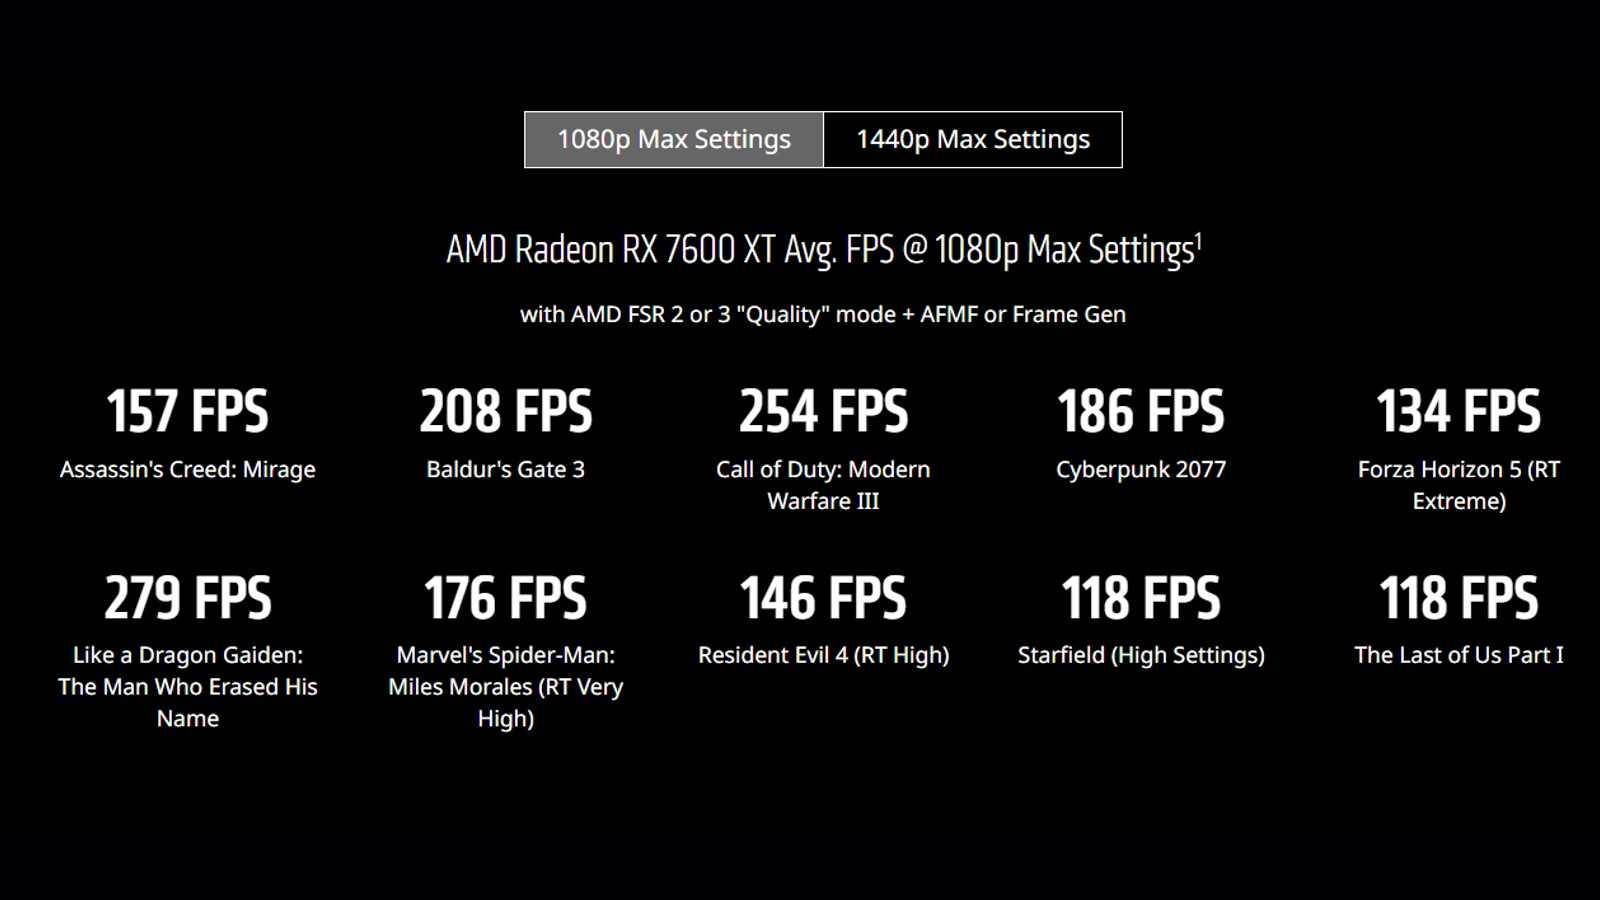 AMD launches Radeon RX 7600 XT GPU with Fluid Motion Frames Technology